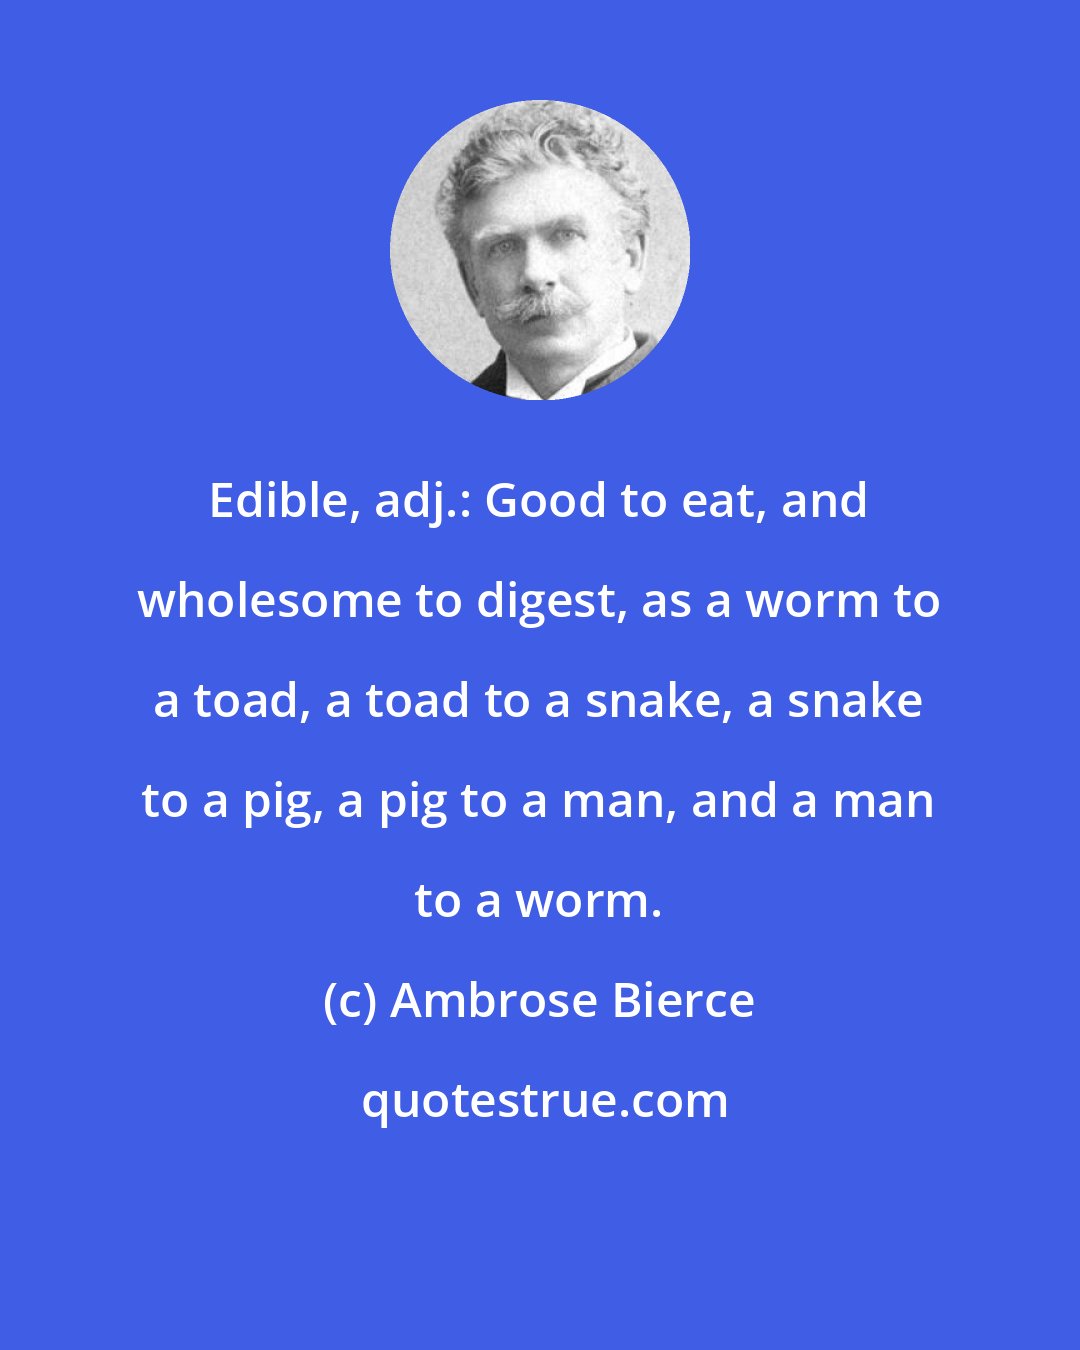 Ambrose Bierce: Edible, adj.: Good to eat, and wholesome to digest, as a worm to a toad, a toad to a snake, a snake to a pig, a pig to a man, and a man to a worm.